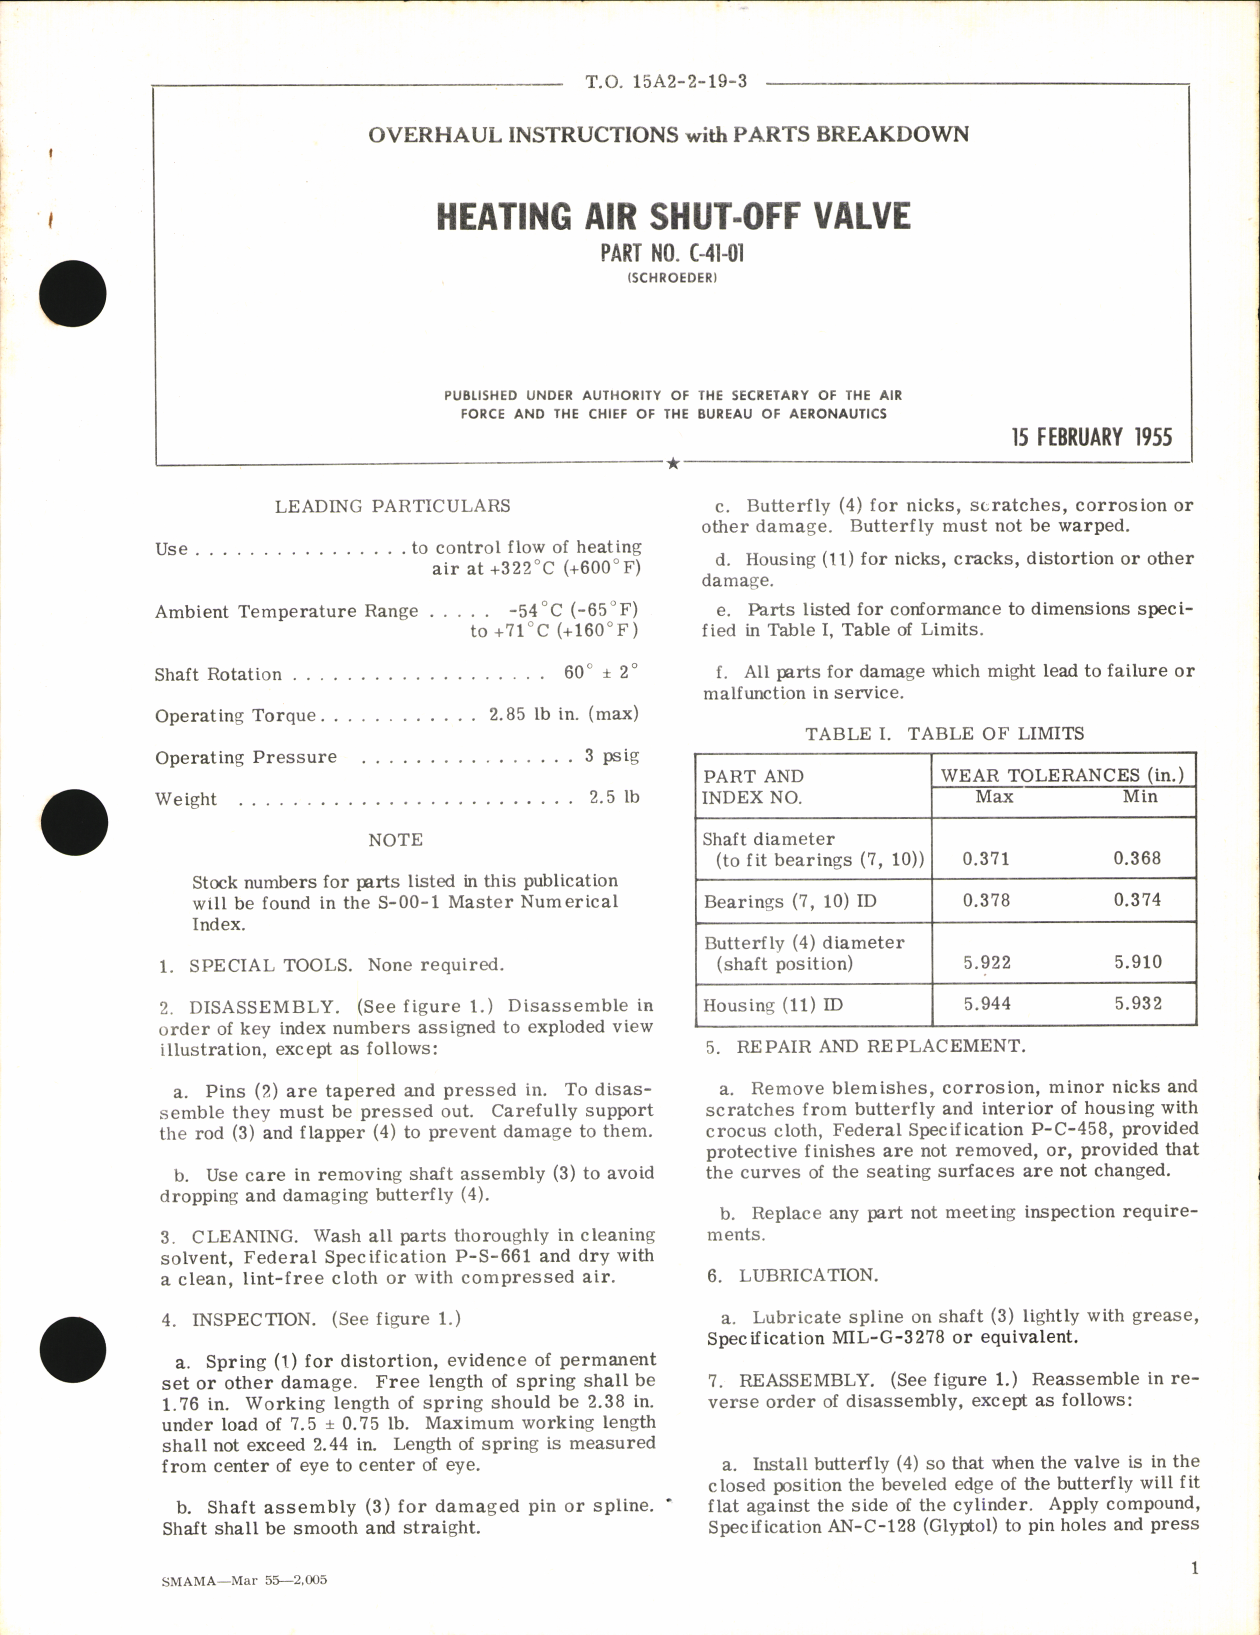 Sample page 1 from AirCorps Library document: Overhaul Instructions with Parts Breakdown for Heating Air Shut-Off Valve Part No. C-41-01